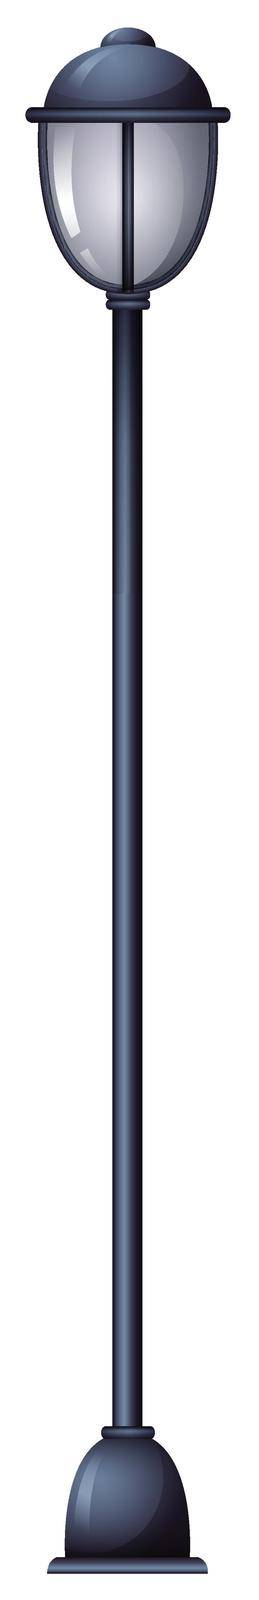 Illustration of a lamp post on a white background